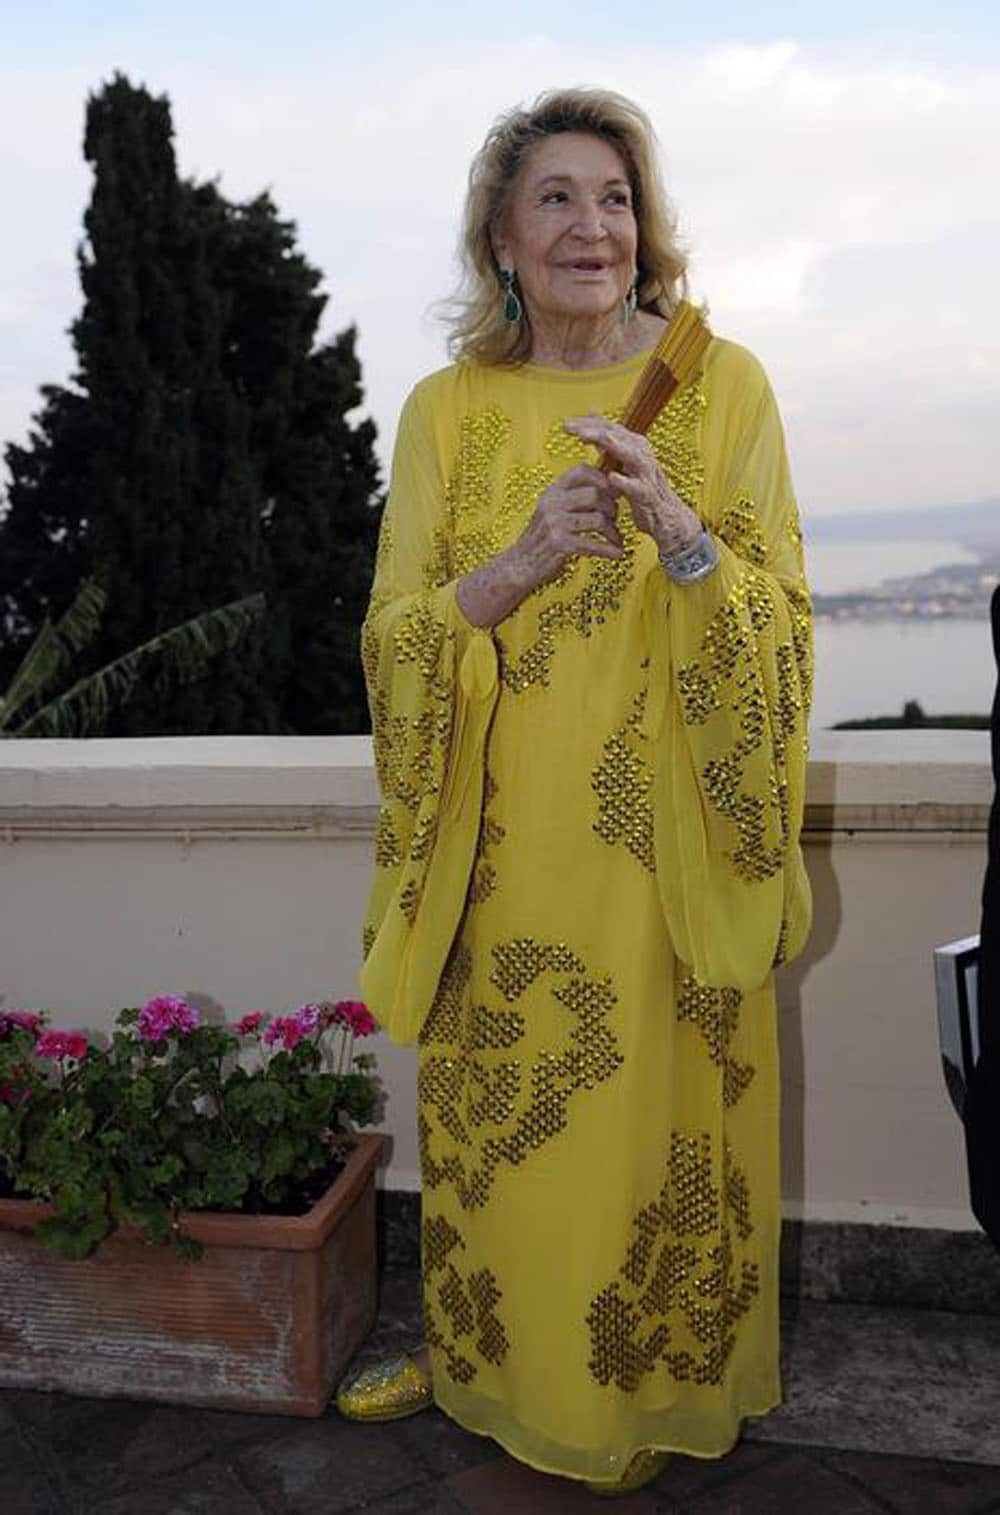 Italian manager Marta Marzotto at a party during the 60thTaormina Film Festival, in Taormina, Sicily Island, Italy, 15 June 2014. The festival runs from 14 to 21 June. ANSA/CLAUDIO ONORATI